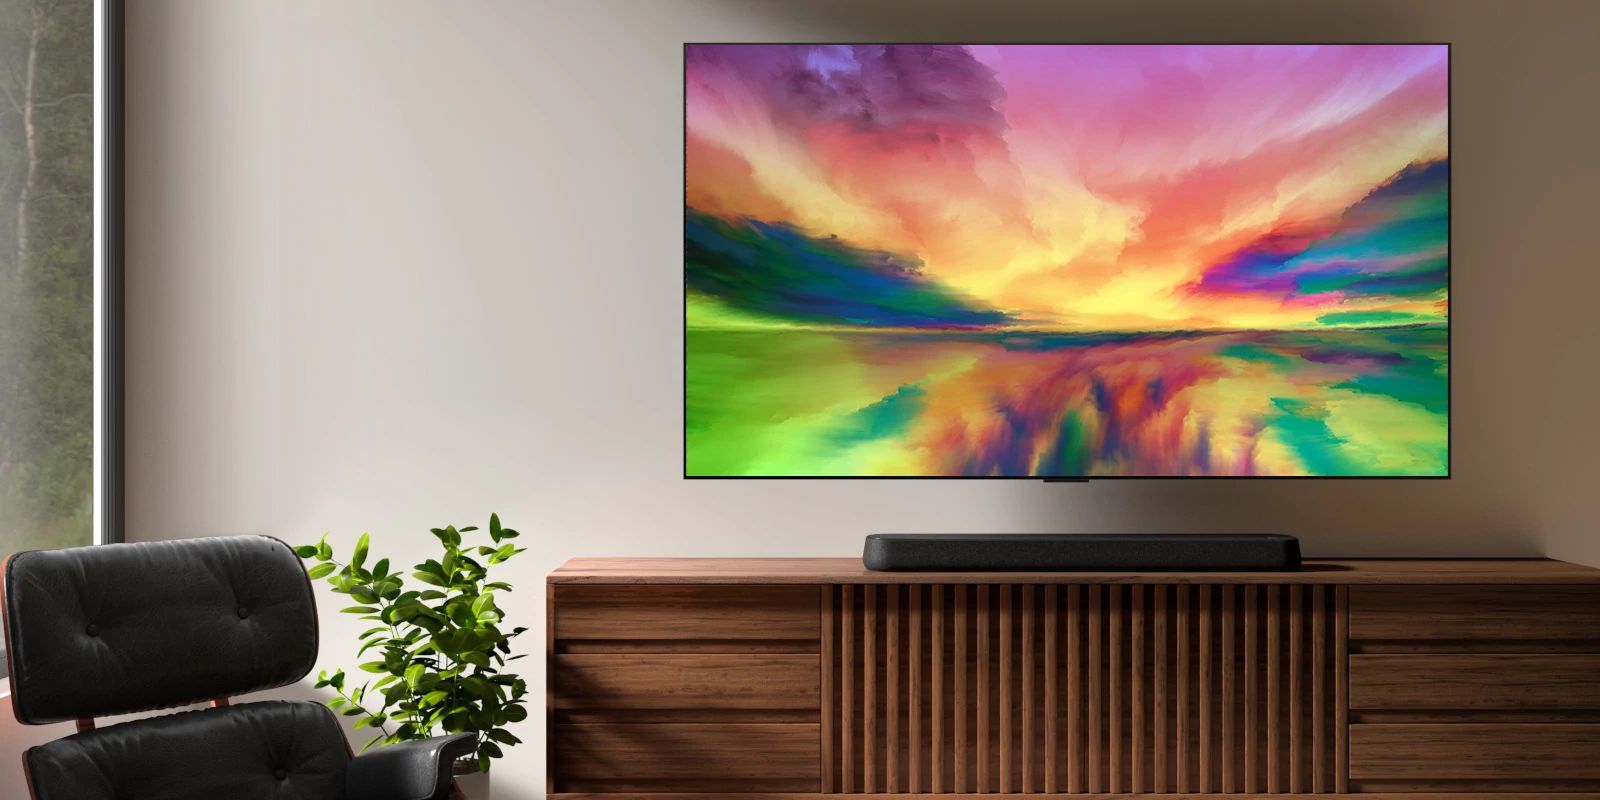 LG SE6 soundbar on wooden table beneath TV showing colorful abstract image